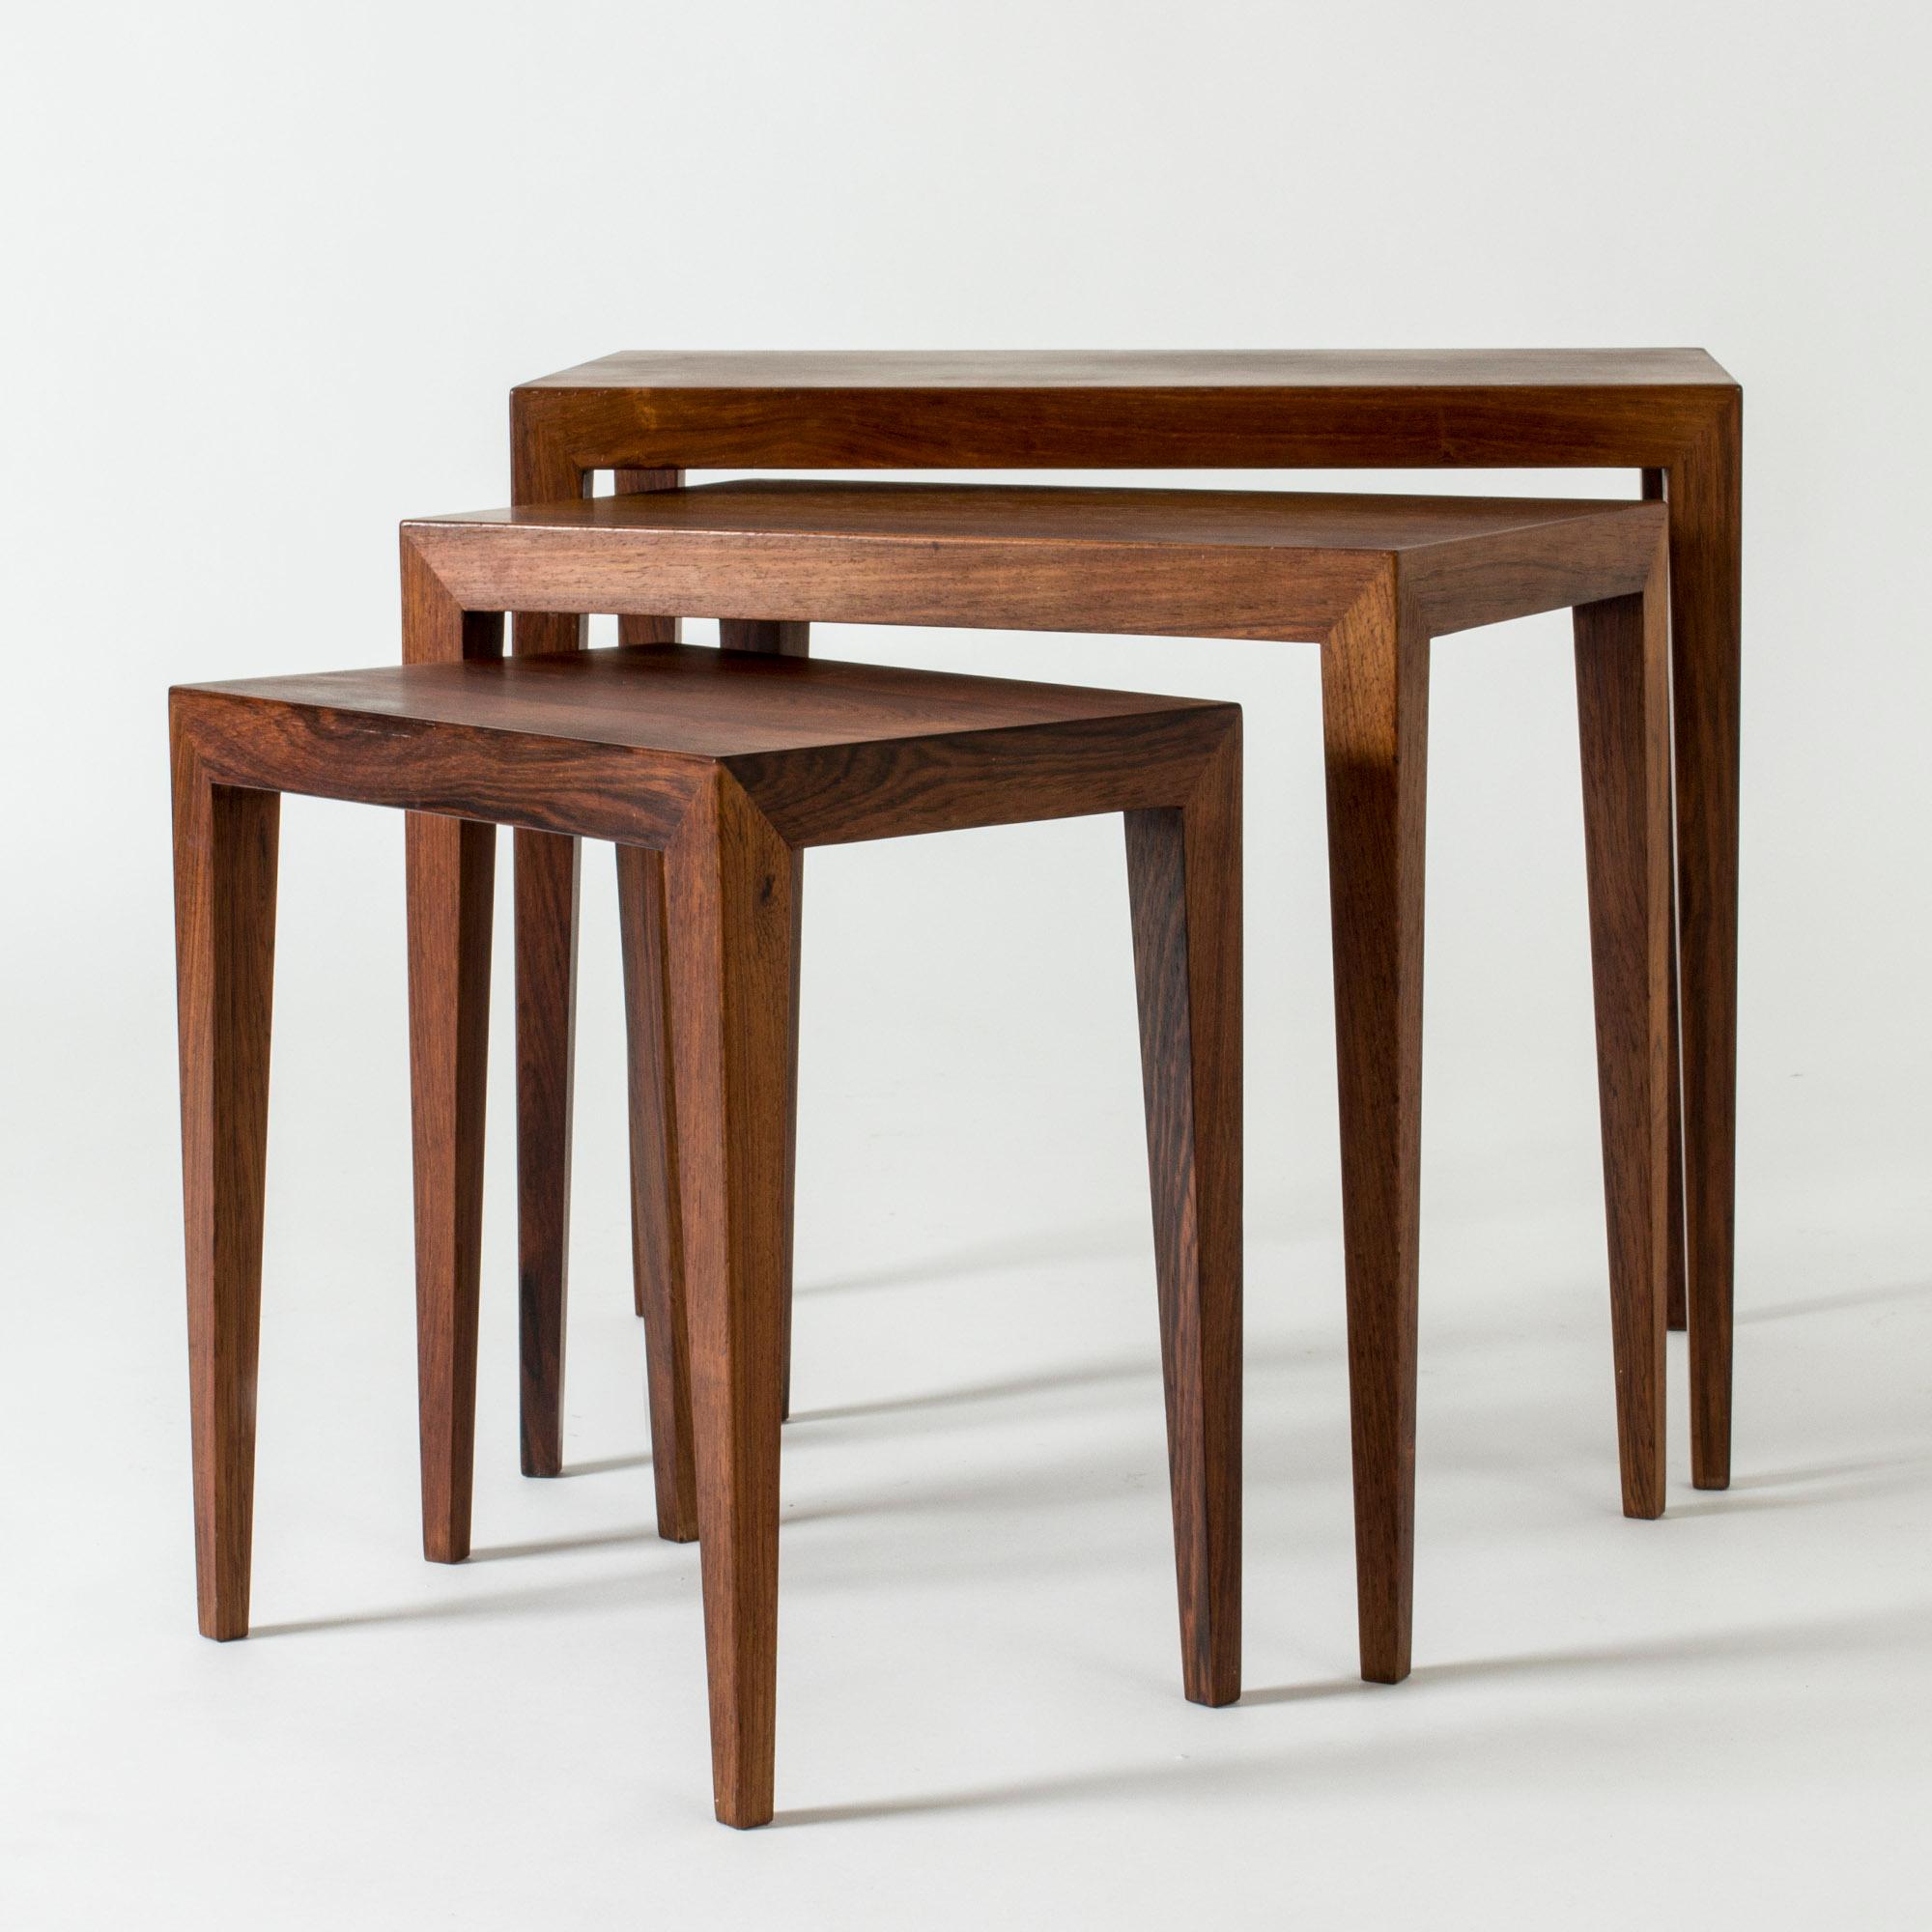 Rosewood nesting table by Severin Hansen with three, neat tables. Severin Hansen’s characteristic diagonal, seamless joinery at the corners.